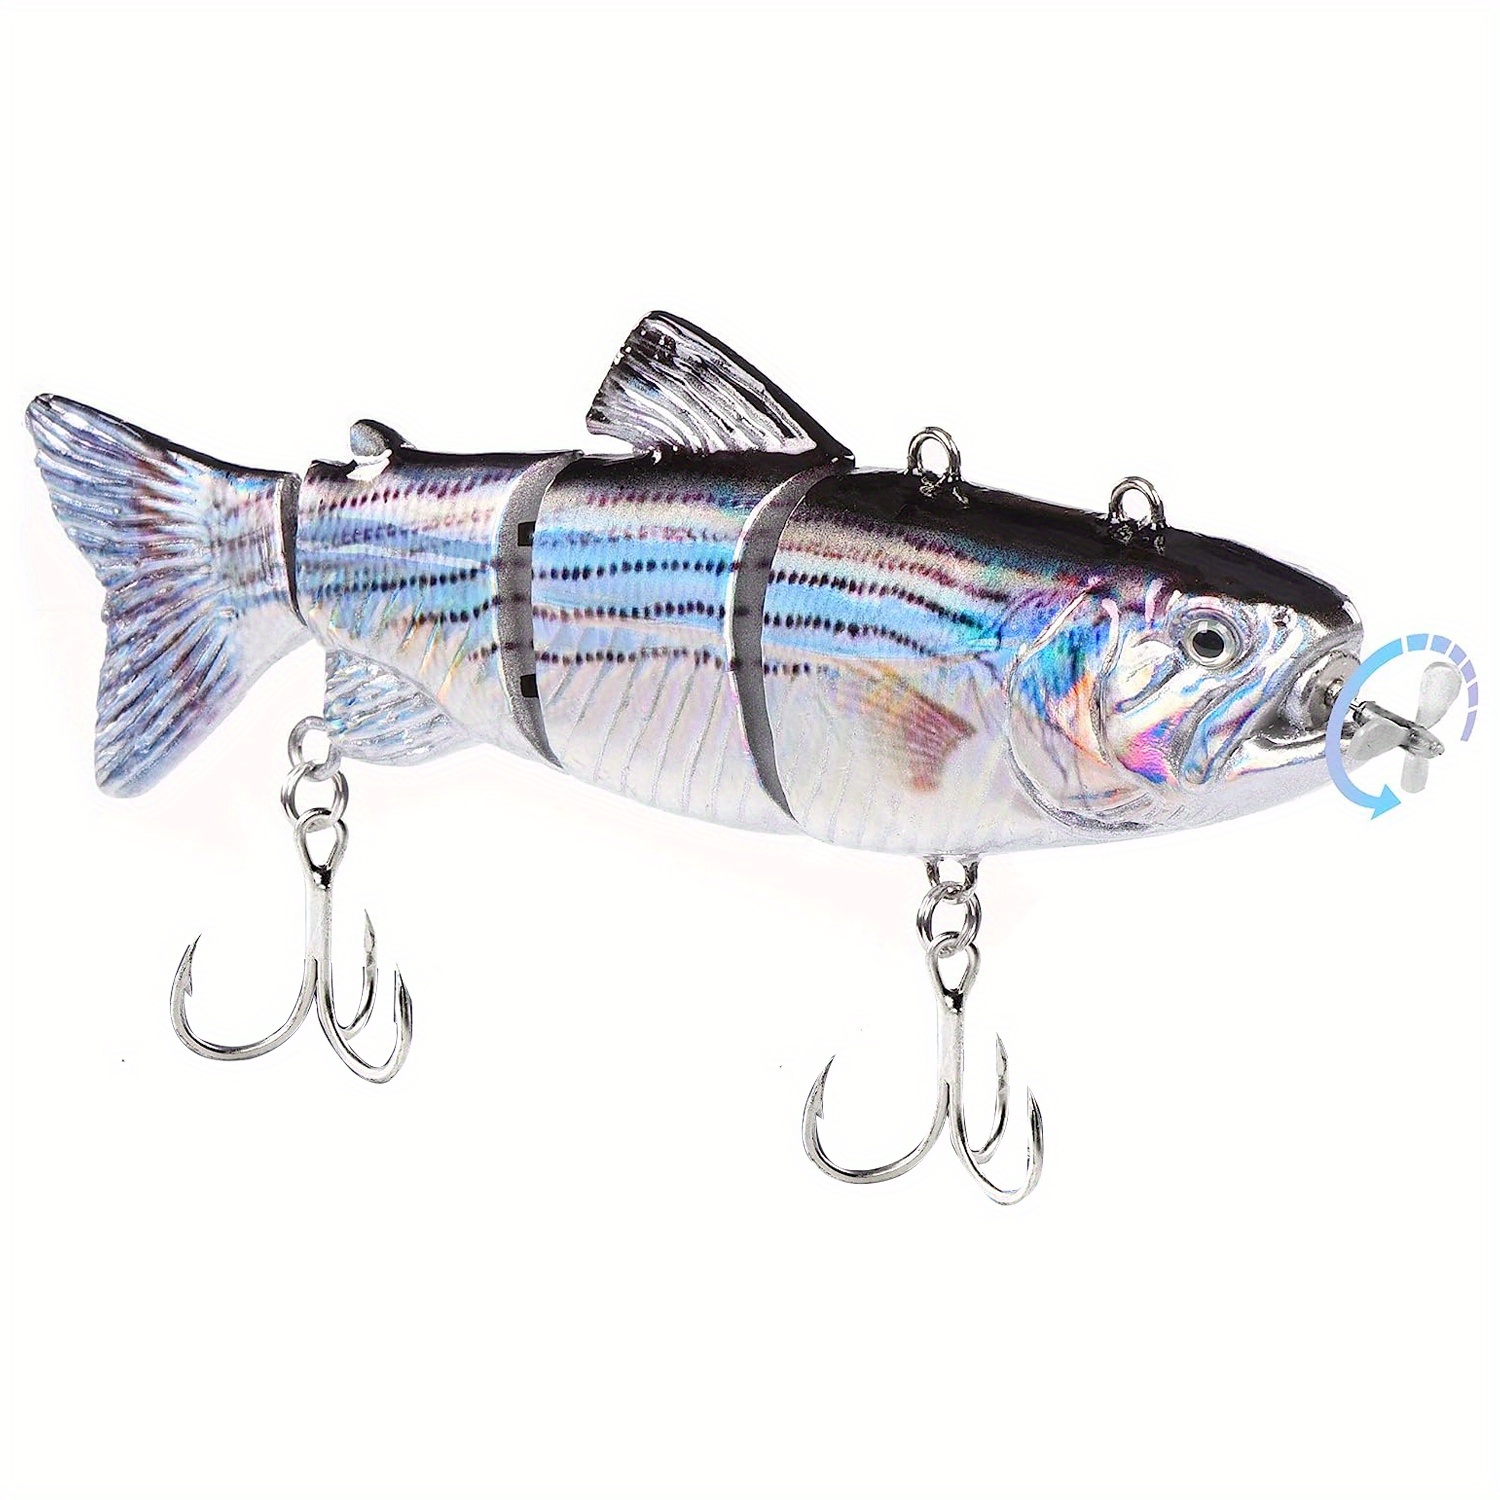 Fishing Lure - Robot Fishing Lures 5.5 Inch with USB Rechargeable